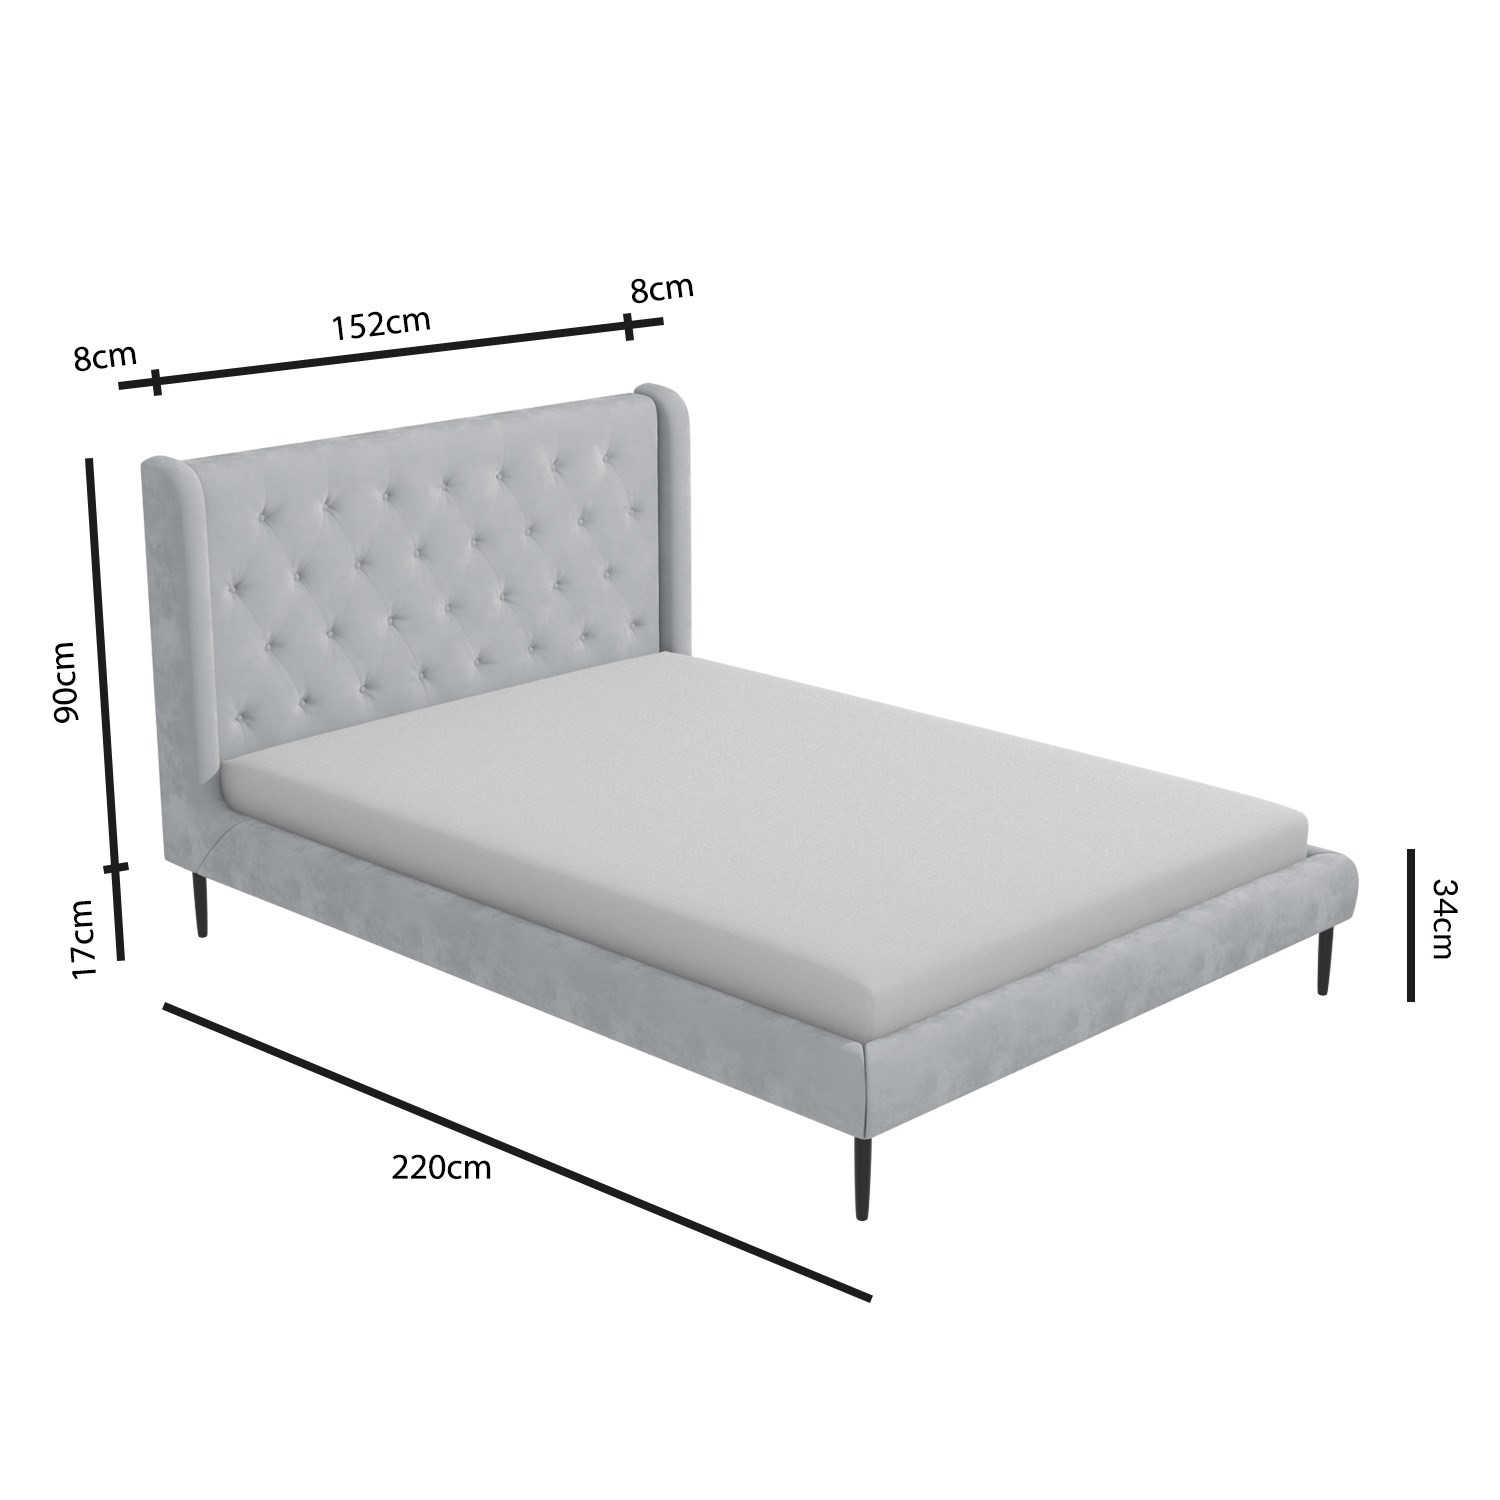 Light Grey Velvet King Size Bed Frame, What Are The Dimensions For A King Size Bed Frame